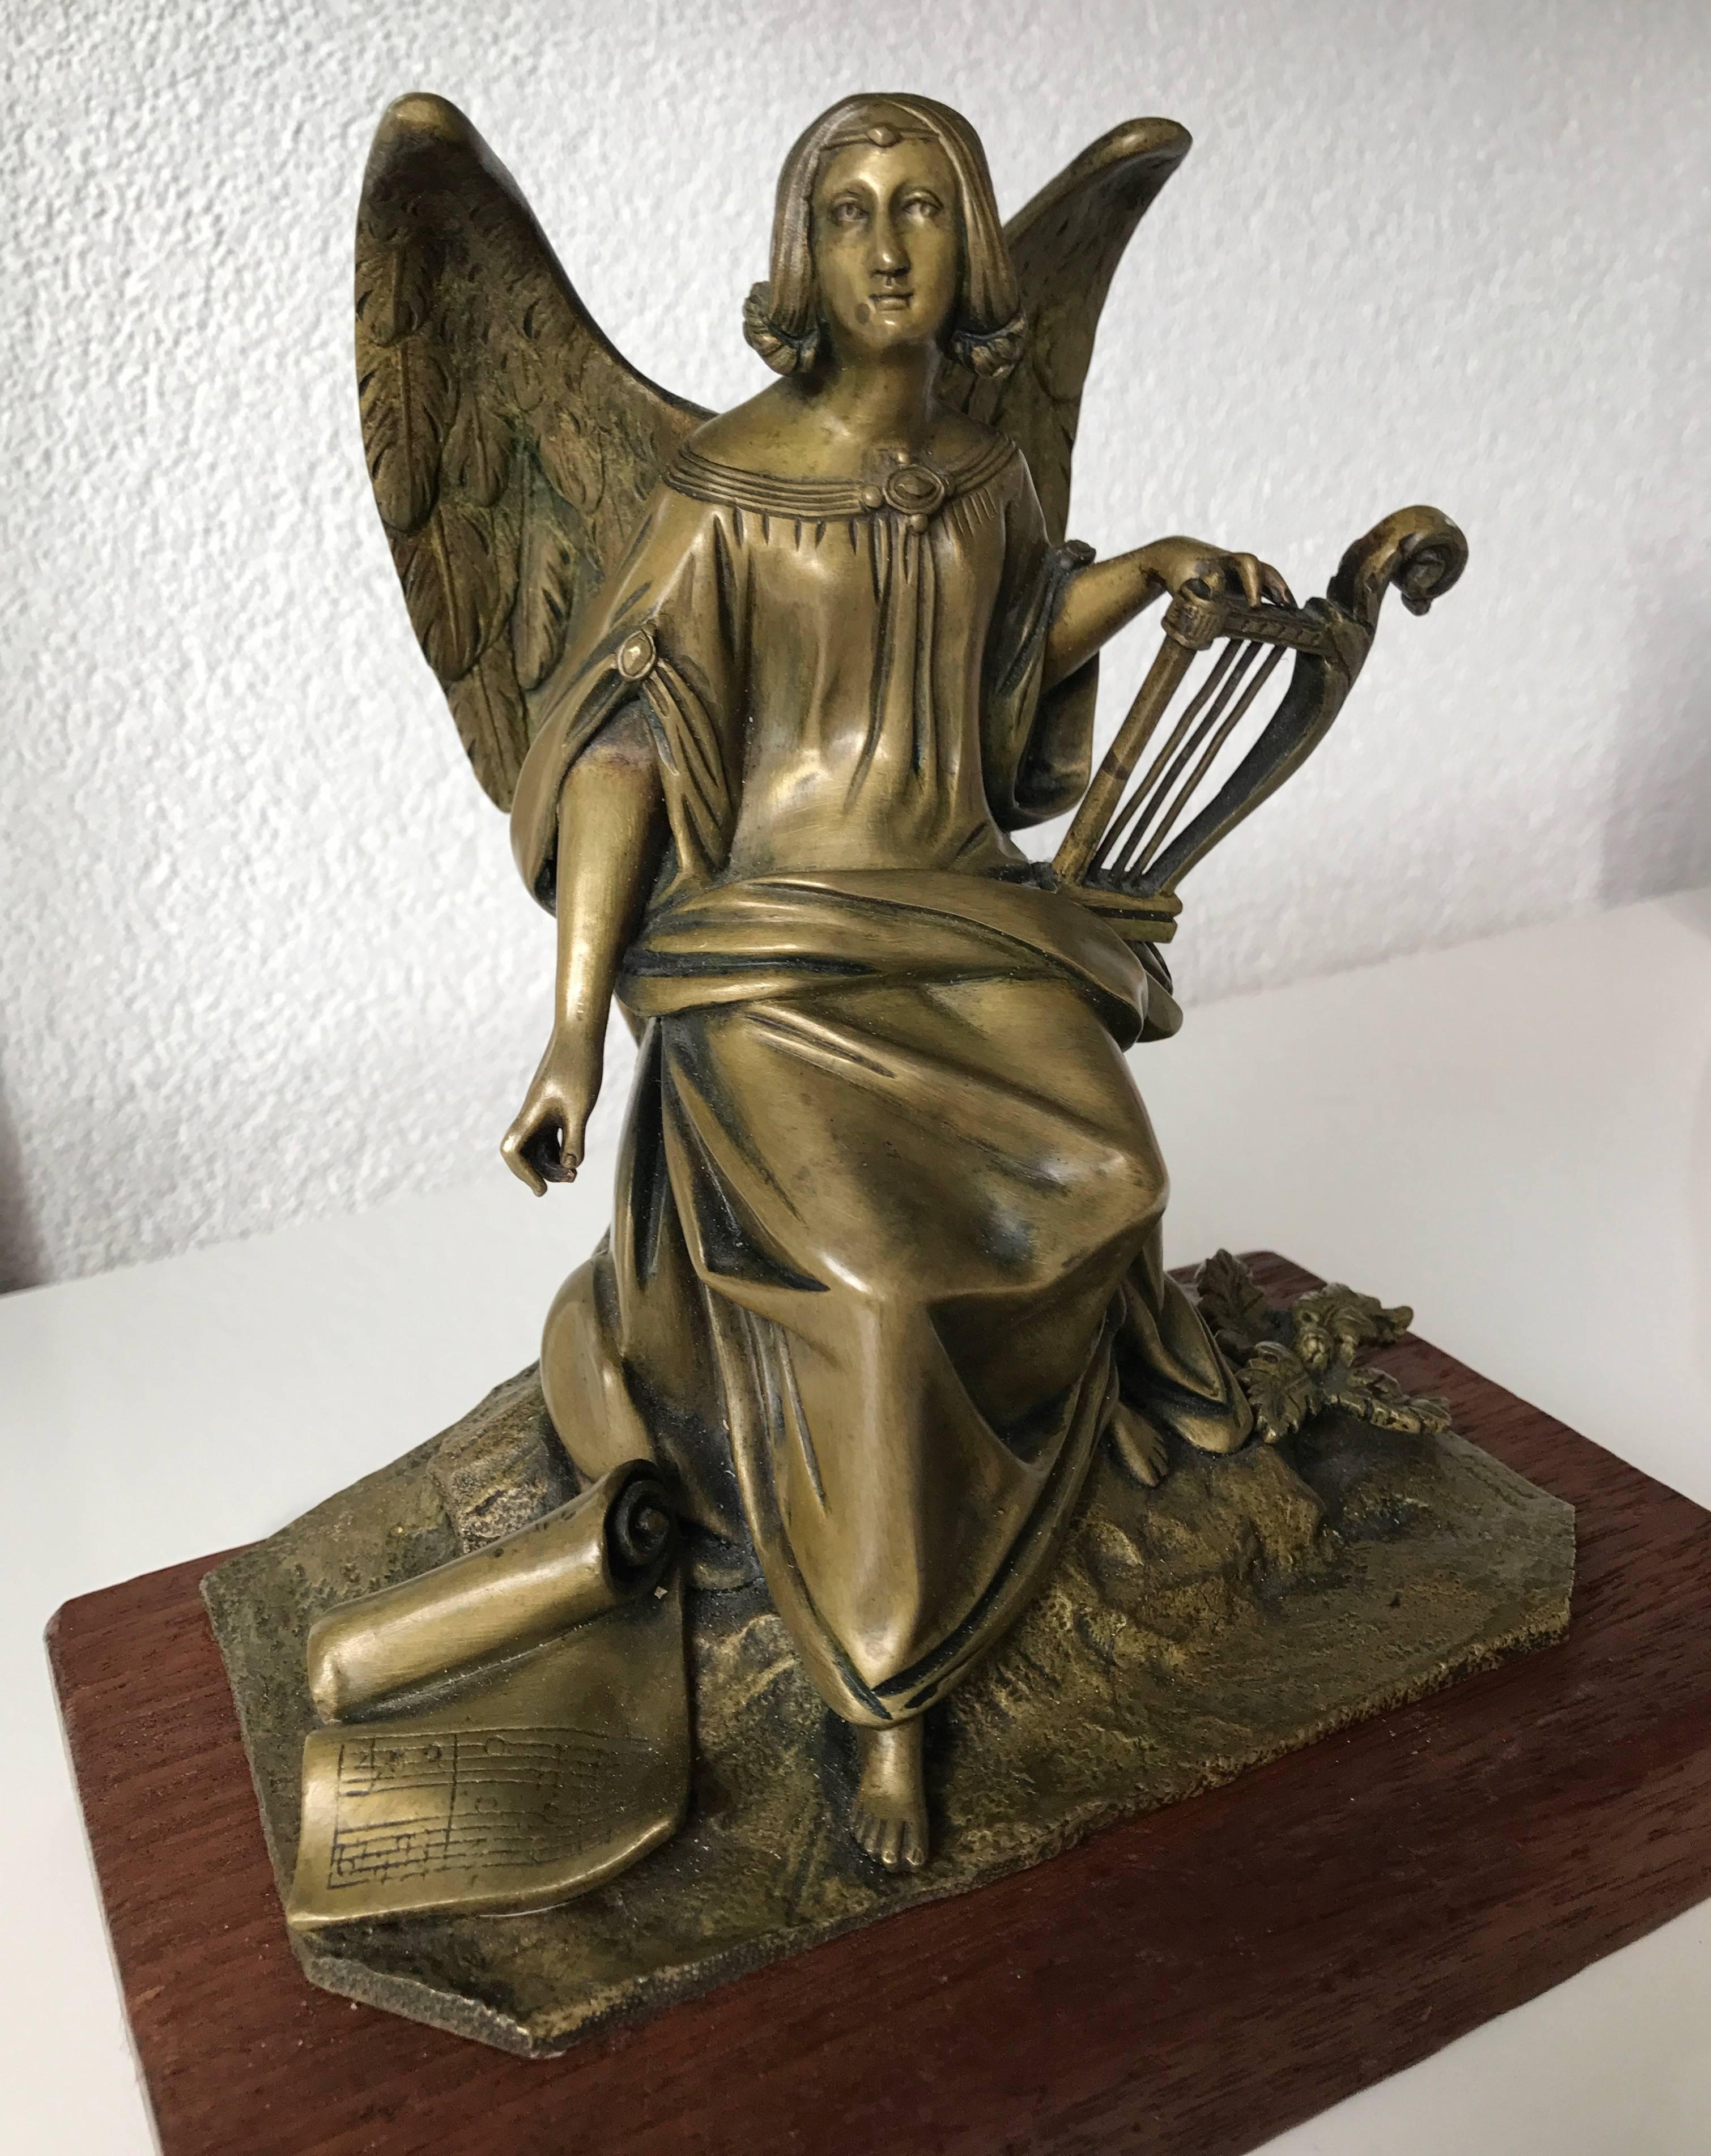 19th Century Antique Bronze Winged Angel Sculpture with Harp by Auguste Eugene Rubin